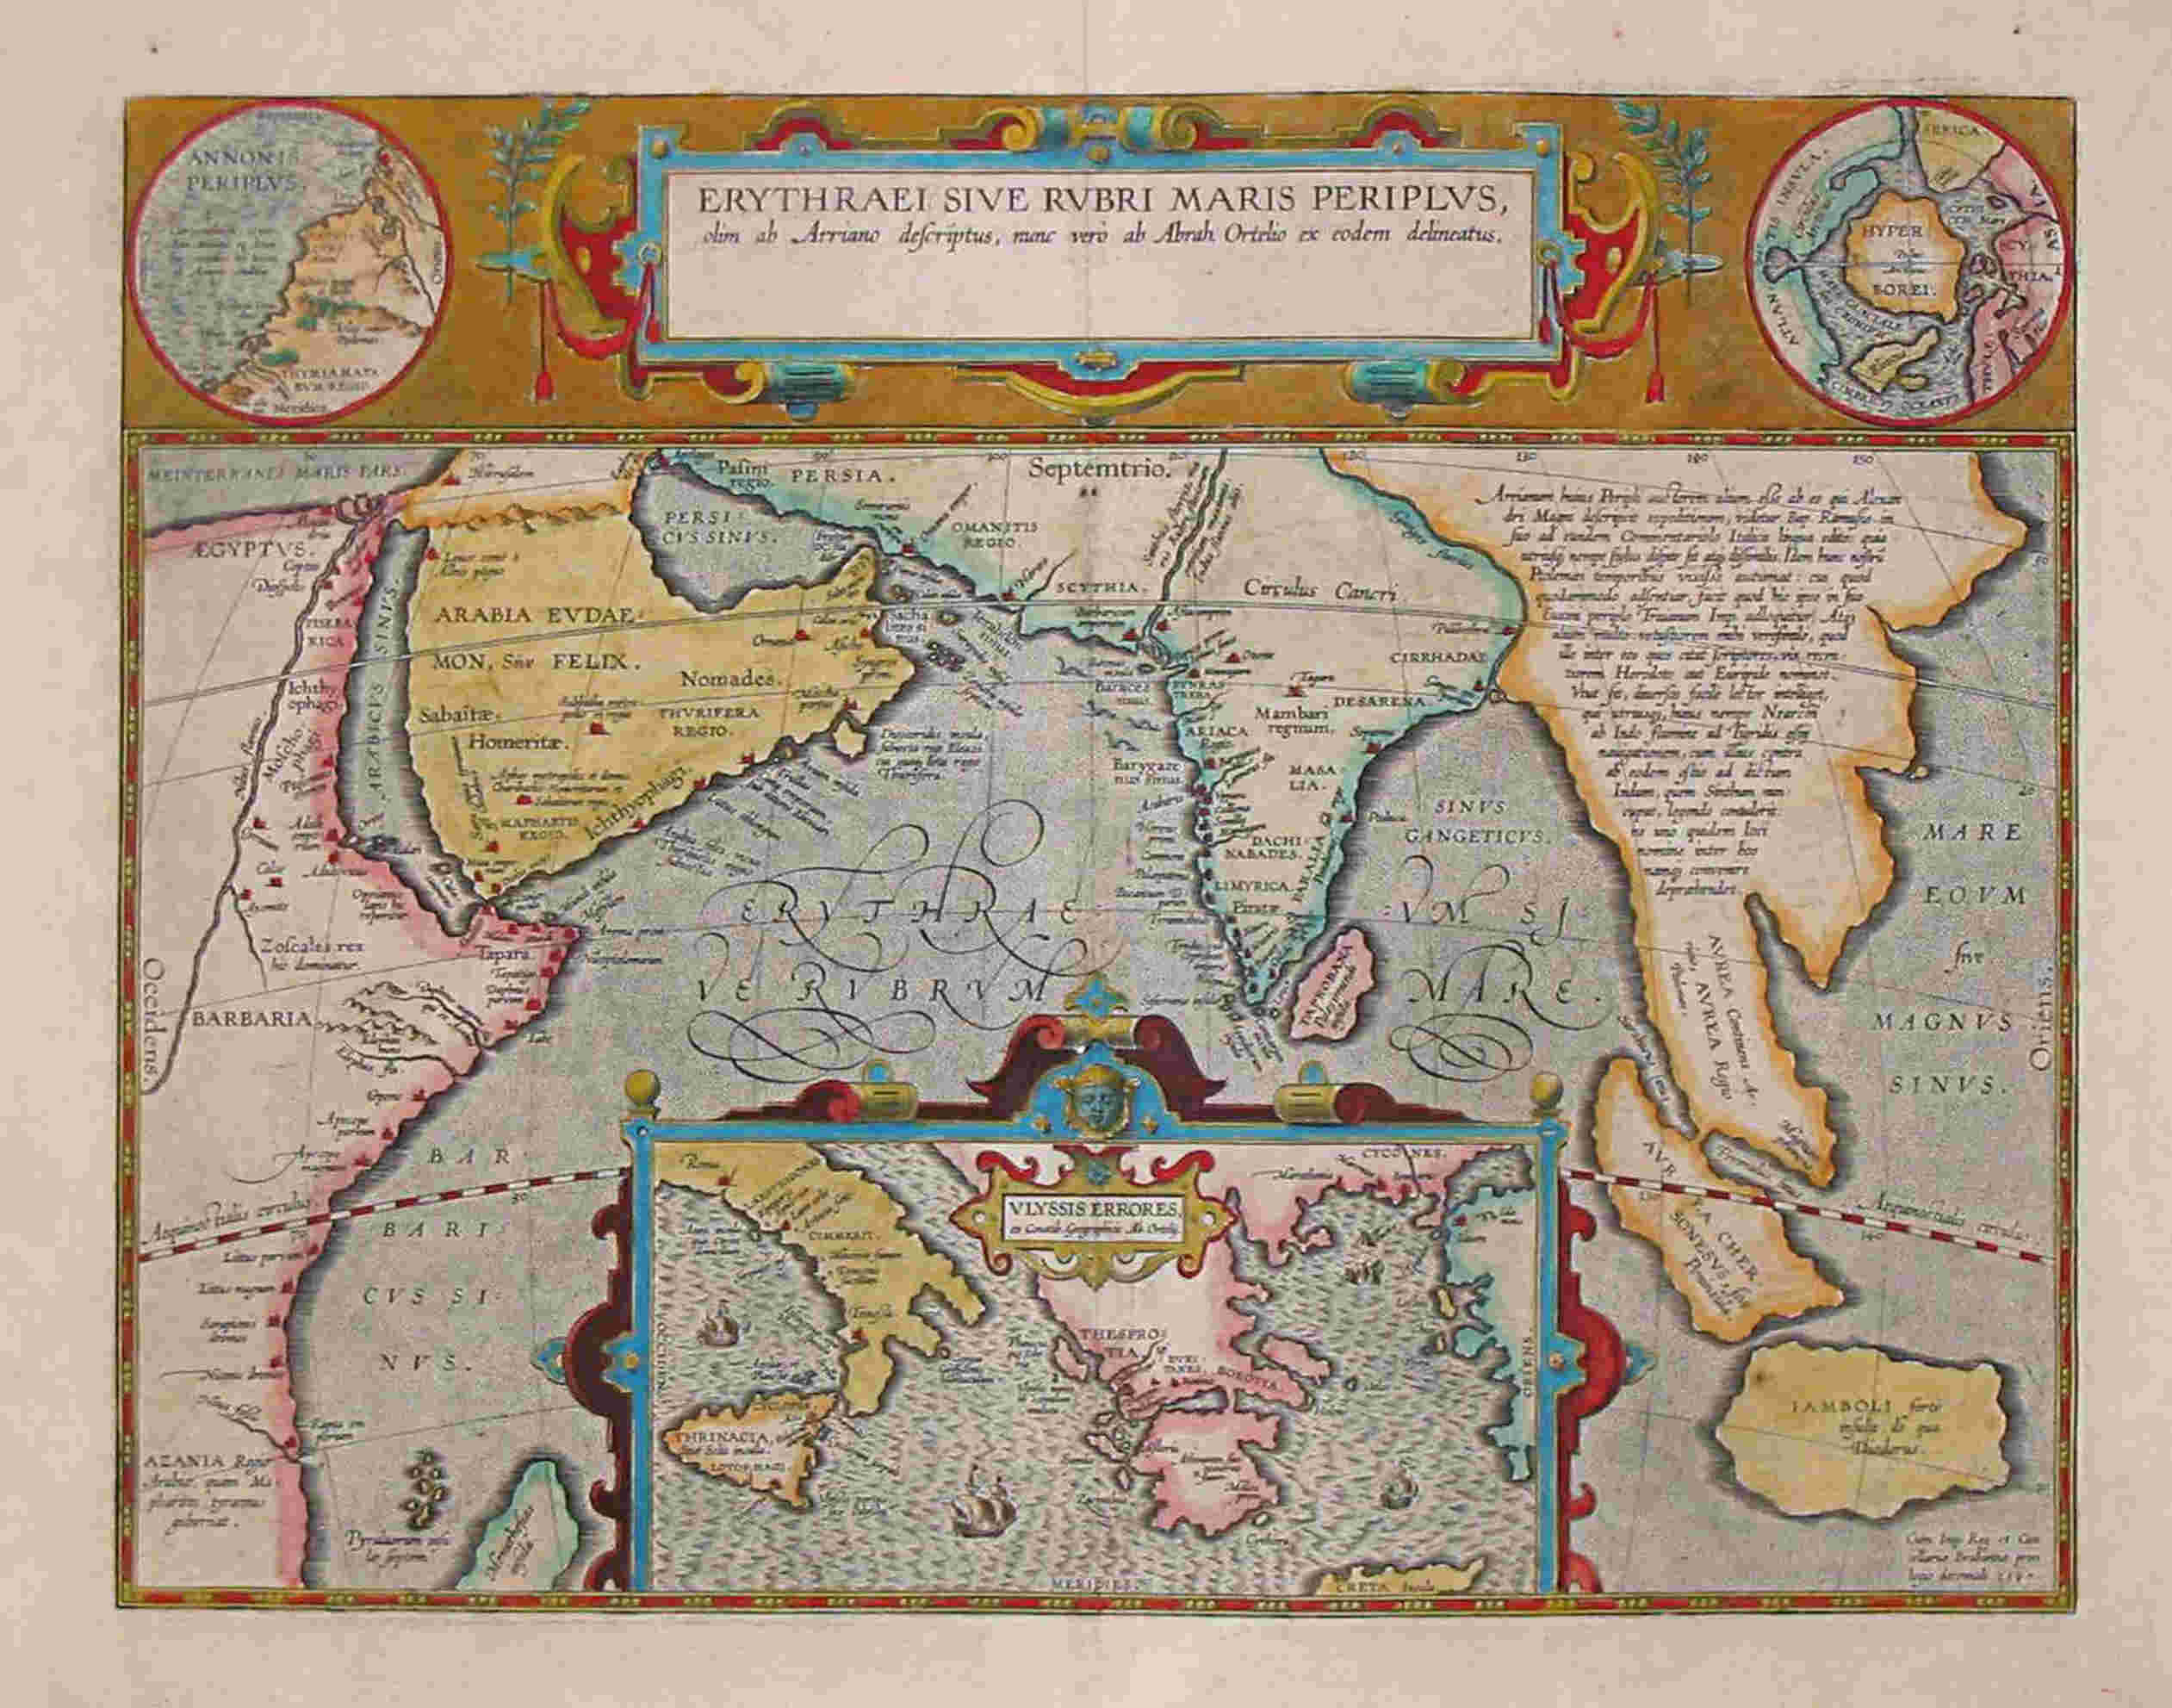 Map of the Erythraean Sea